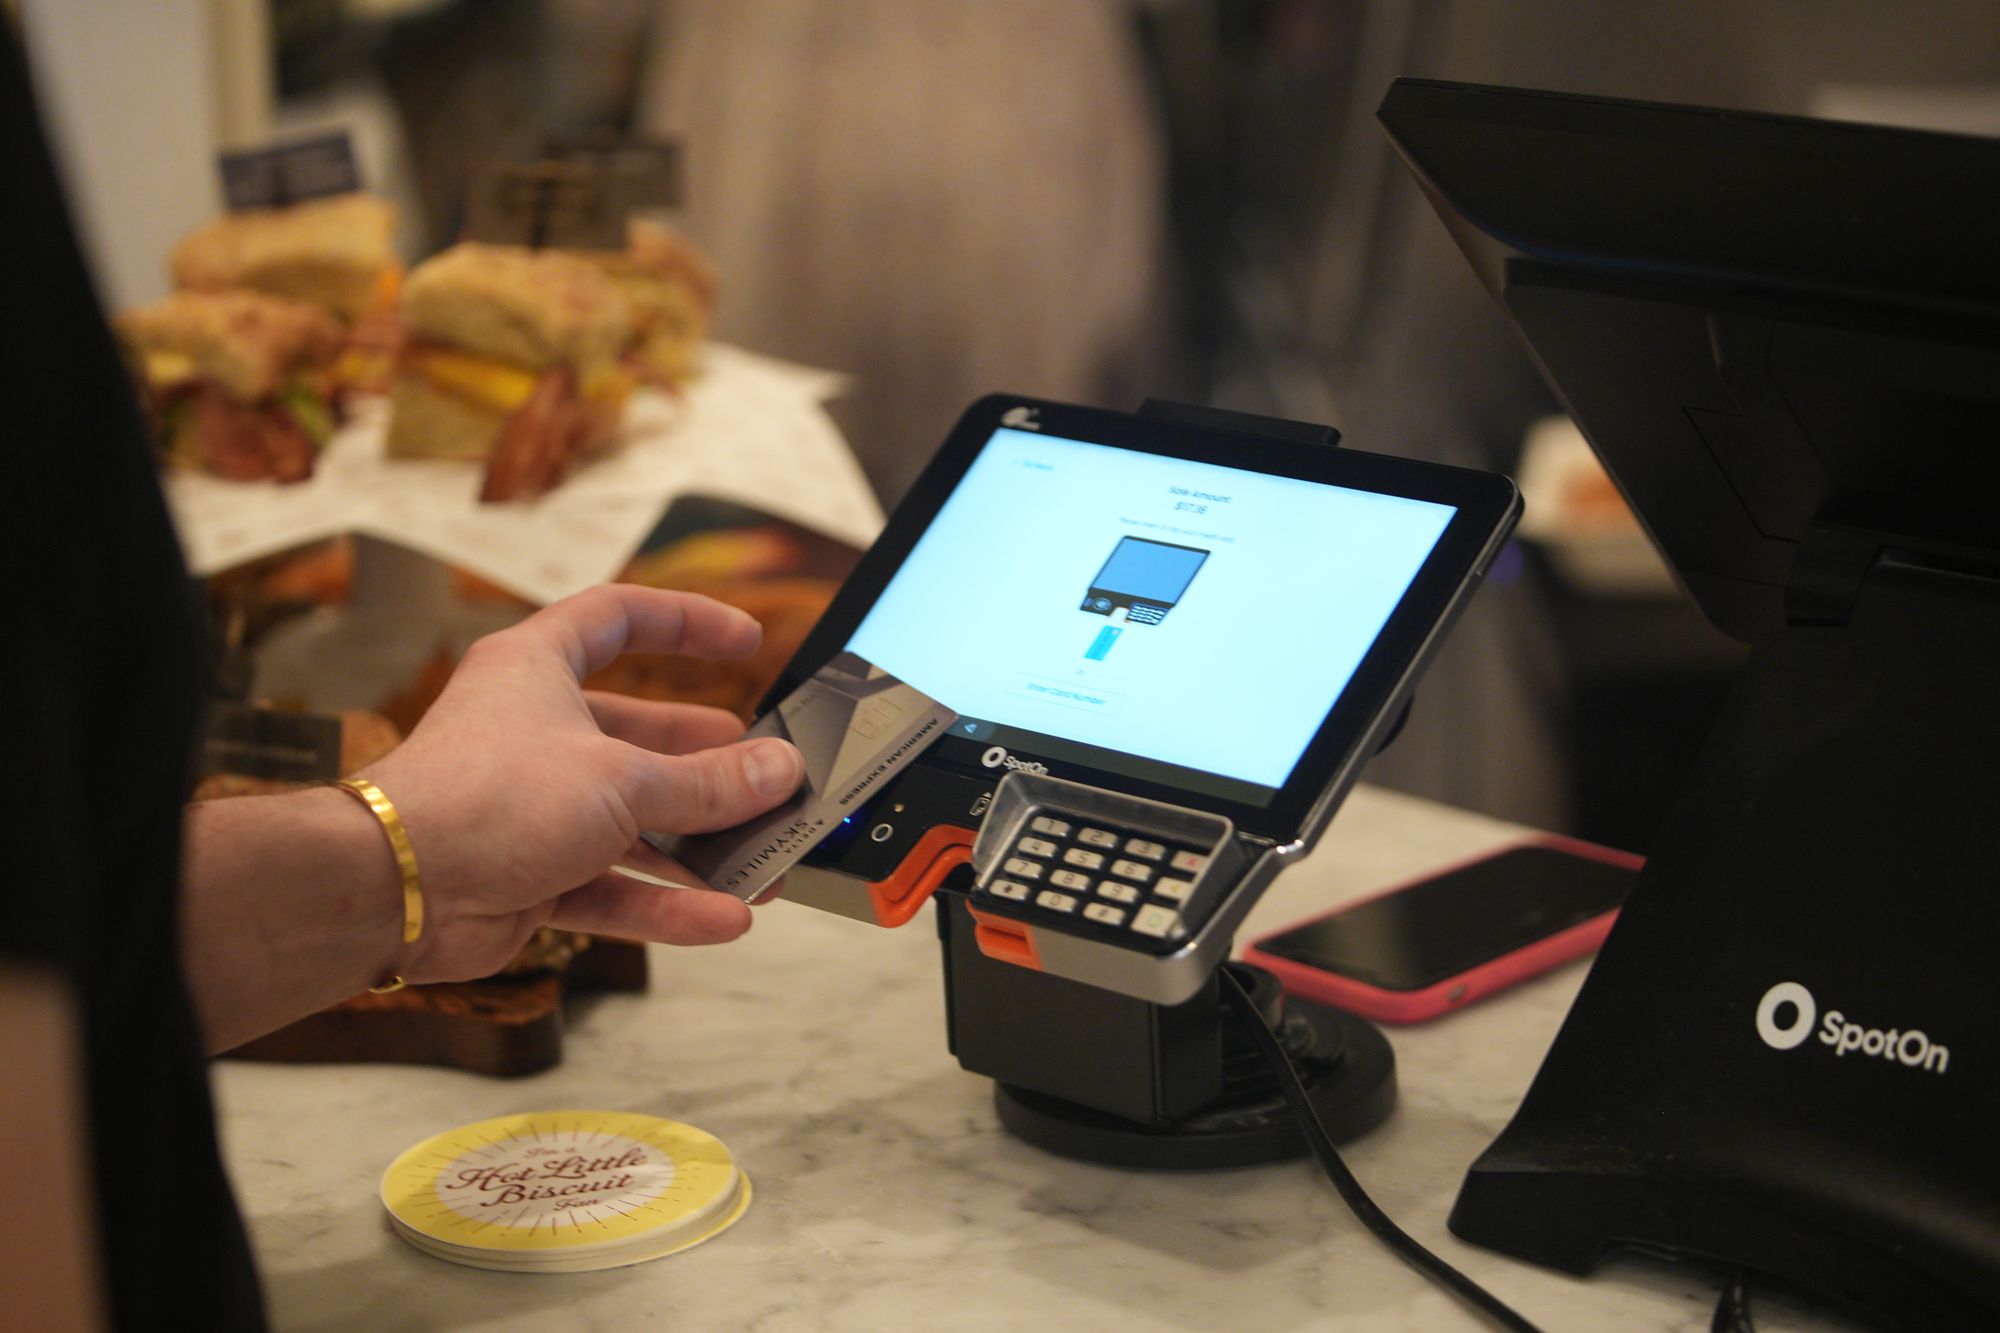 Restaurant guest presses their credit card against a point-of-sale terminal to make a purchase.